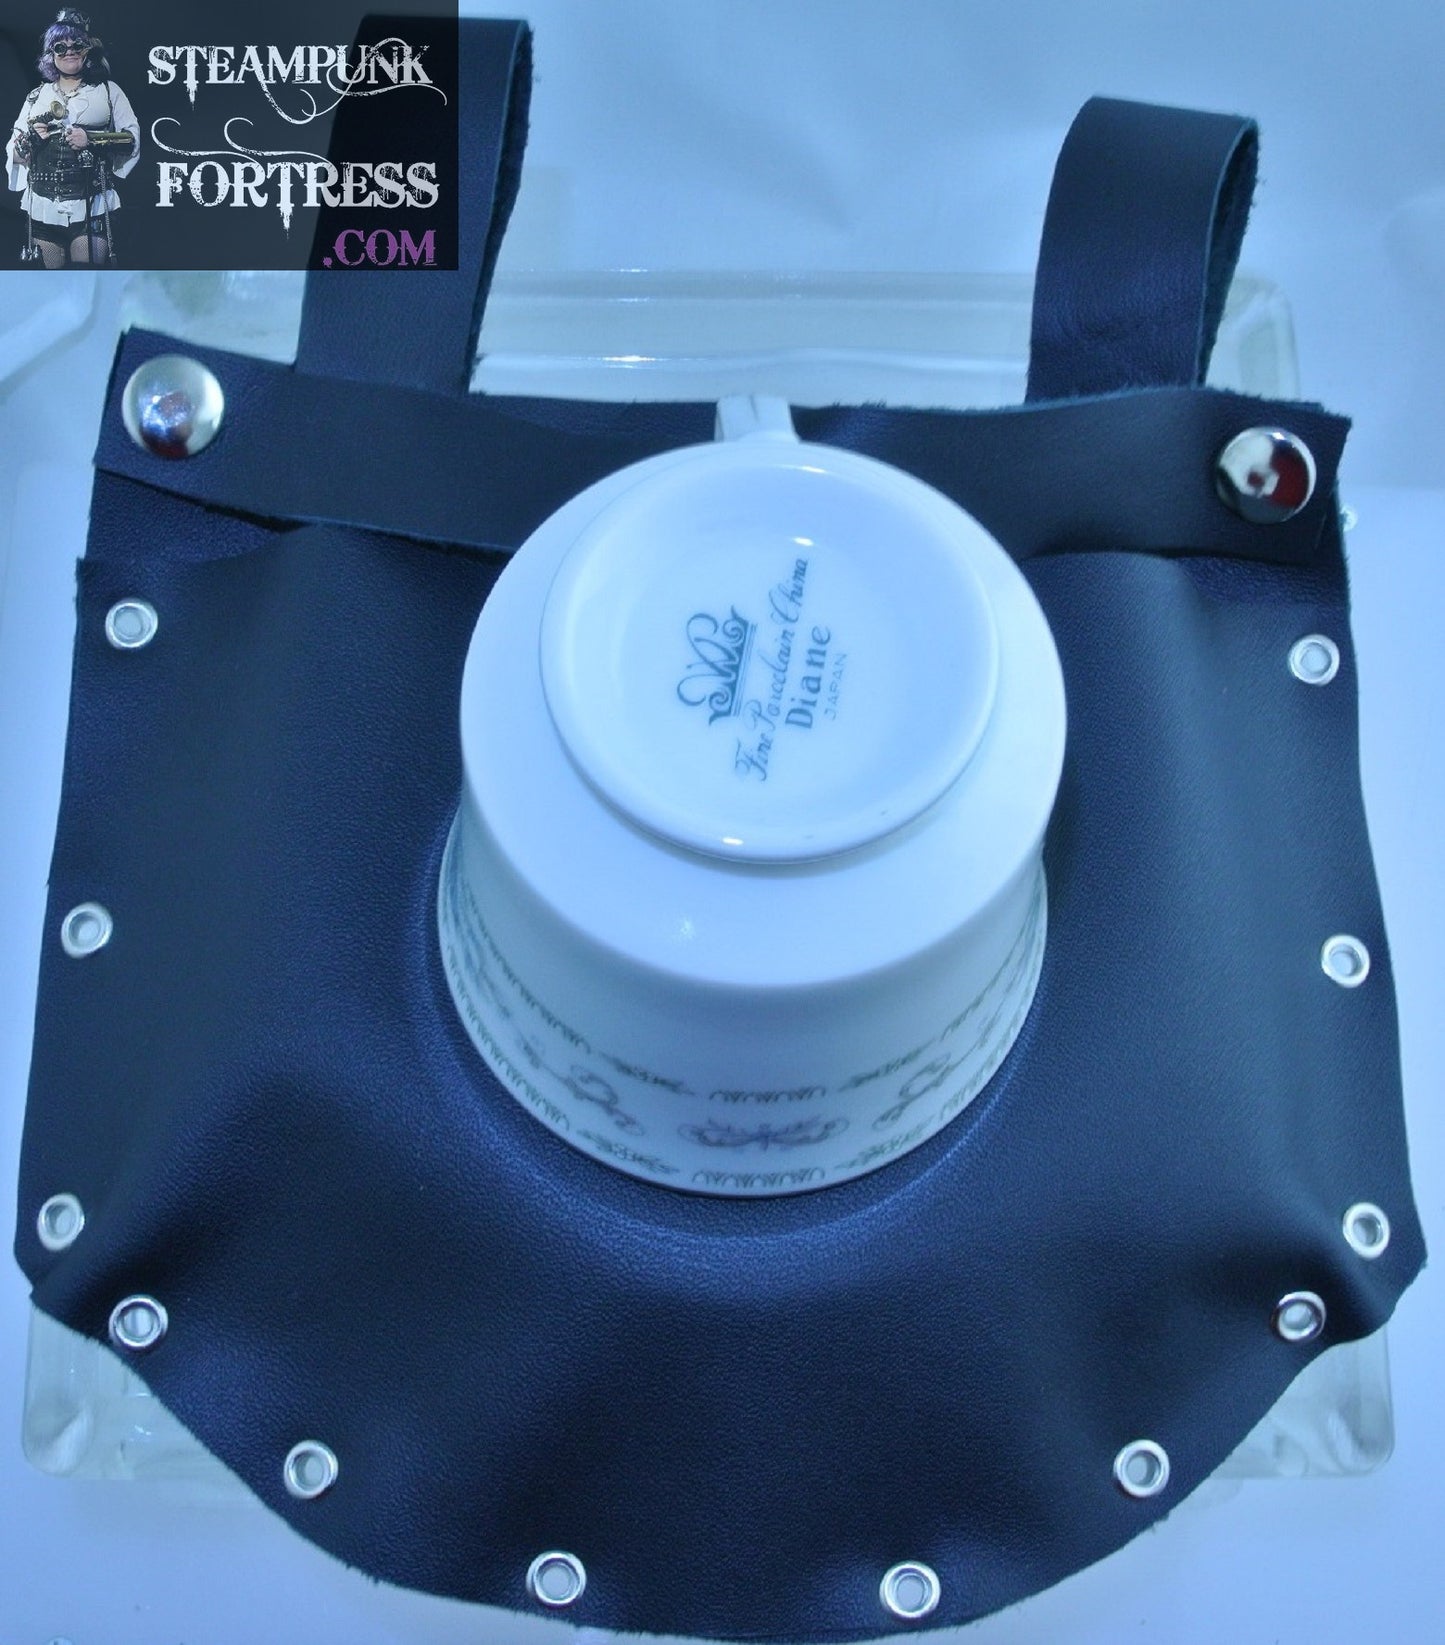 TEA CUP HOLDER BLACK LEATHER SILVER EYELET BLUE WHITE CHINA DUELING DUELLING CUP SAUCER STARR WILDE STEAMPUNK FORTRESS